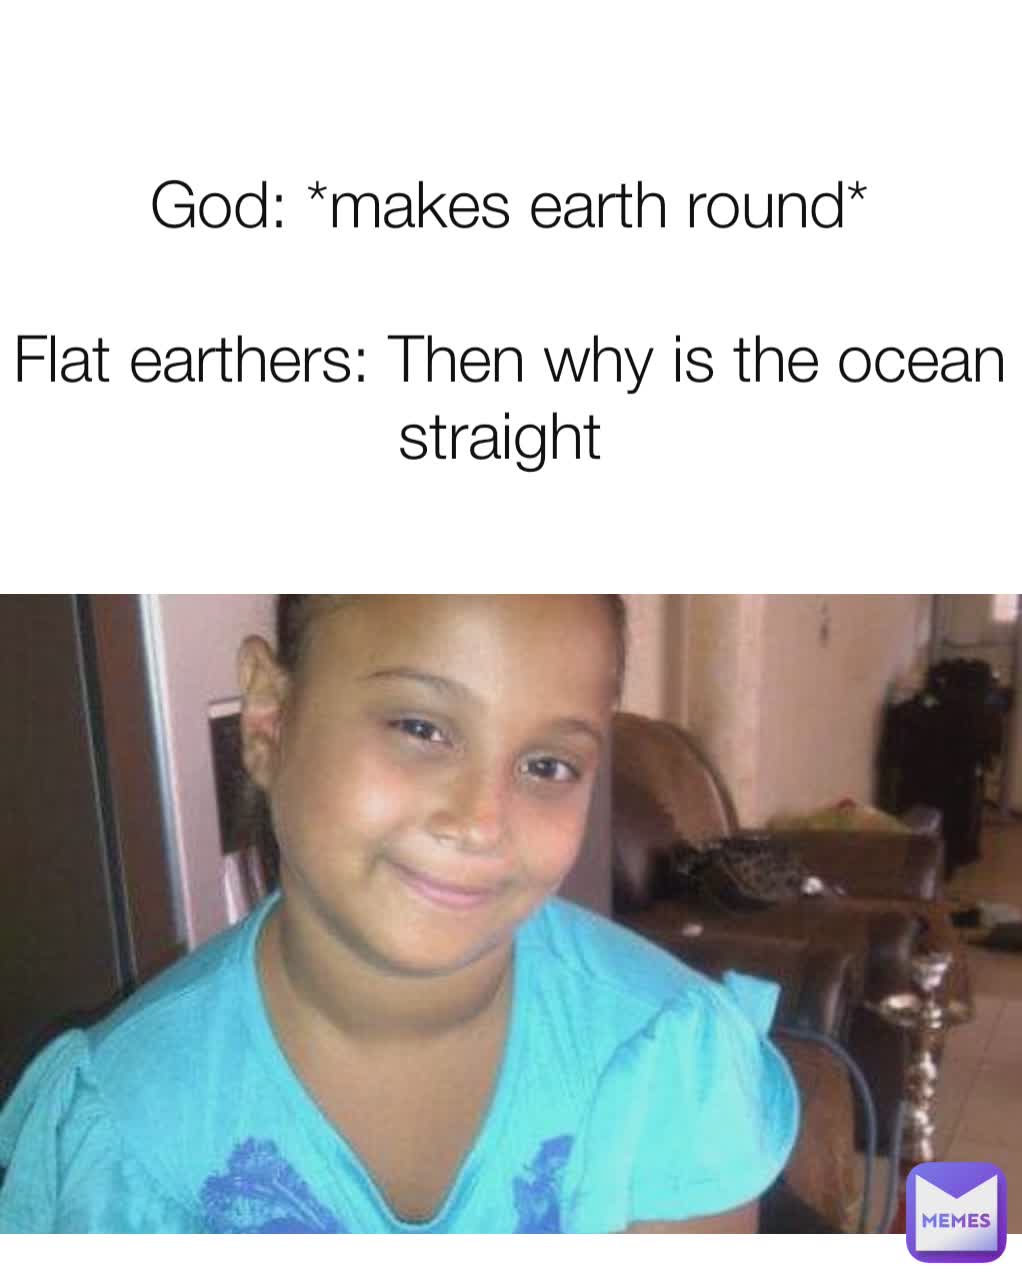 God: *makes earth round*

Flat earthers: Then why is the ocean straight 